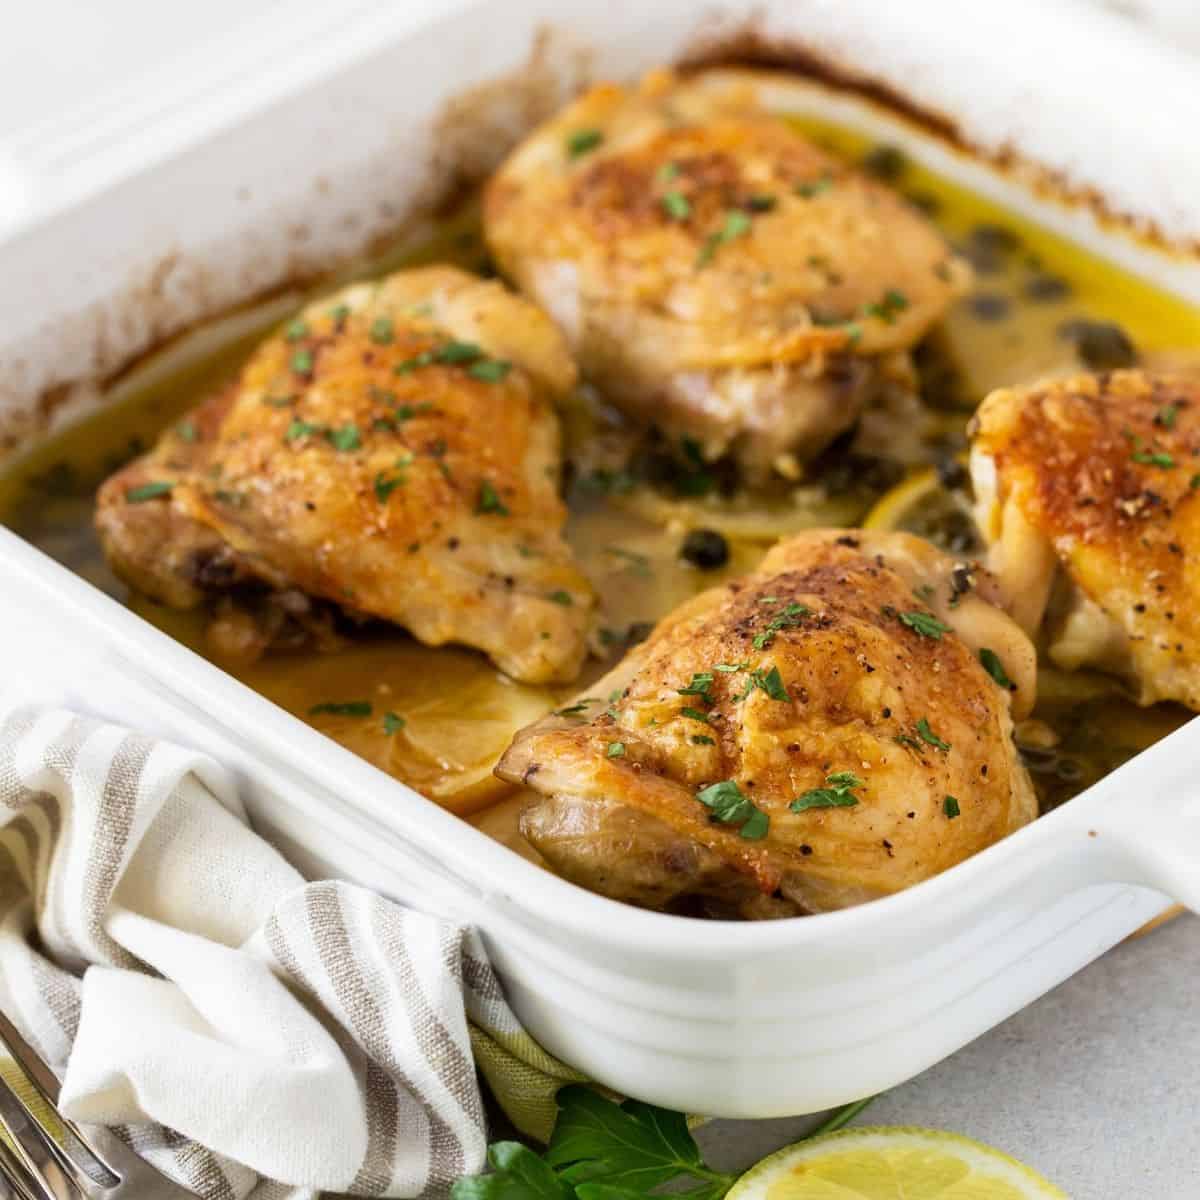 Crispy Baked Chicken Thighs with Capers - Garnish with Lemon